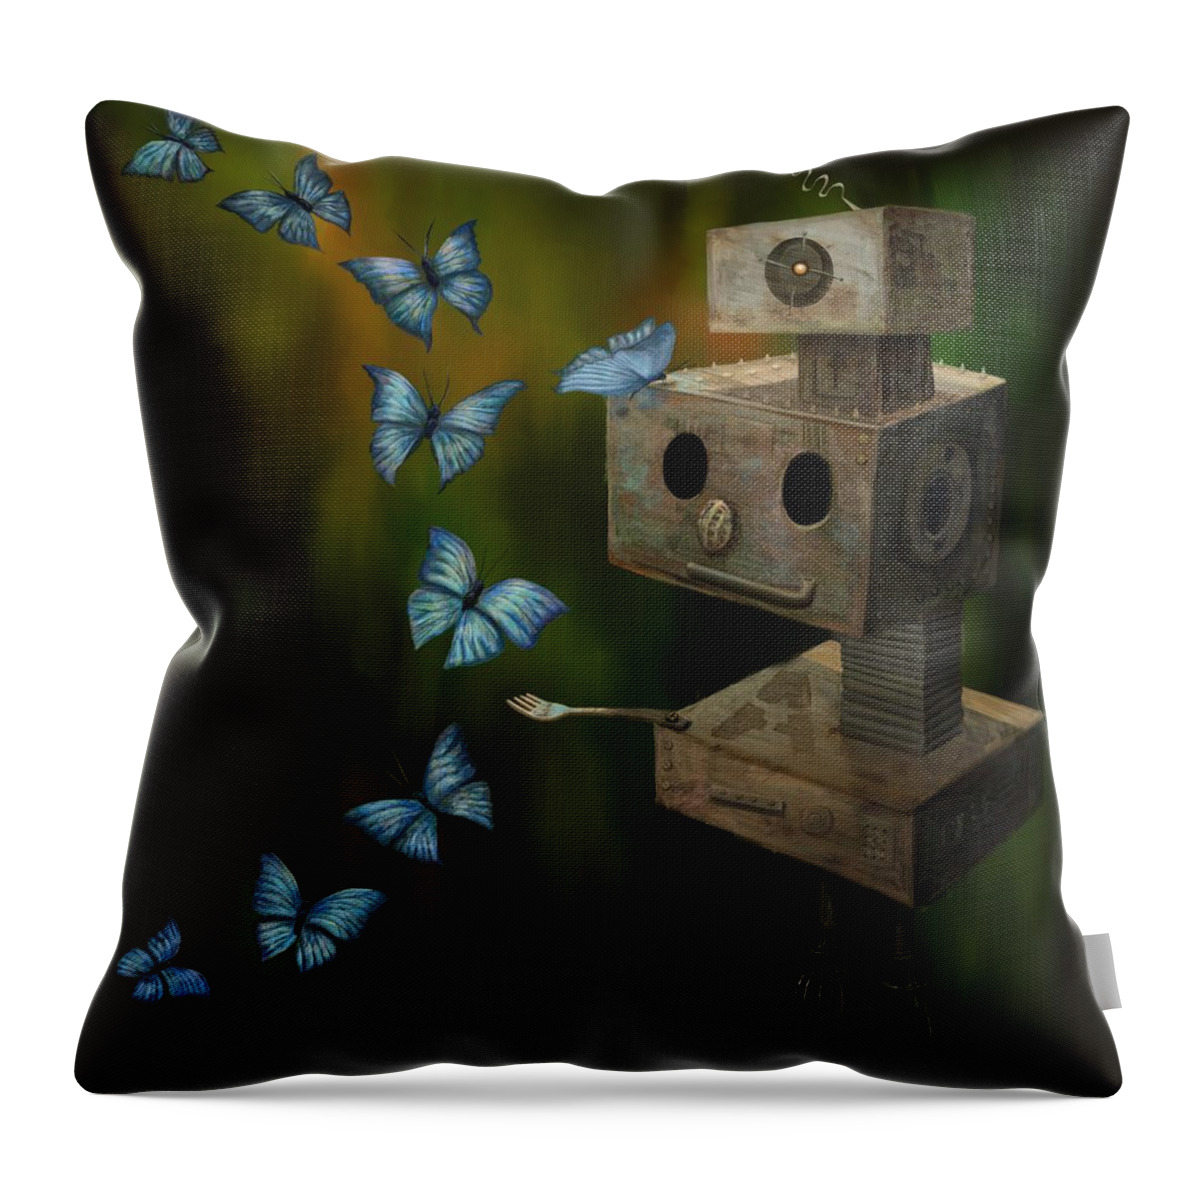 Robot Throw Pillow featuring the digital art A Little Curiosity by Catherine Swenson